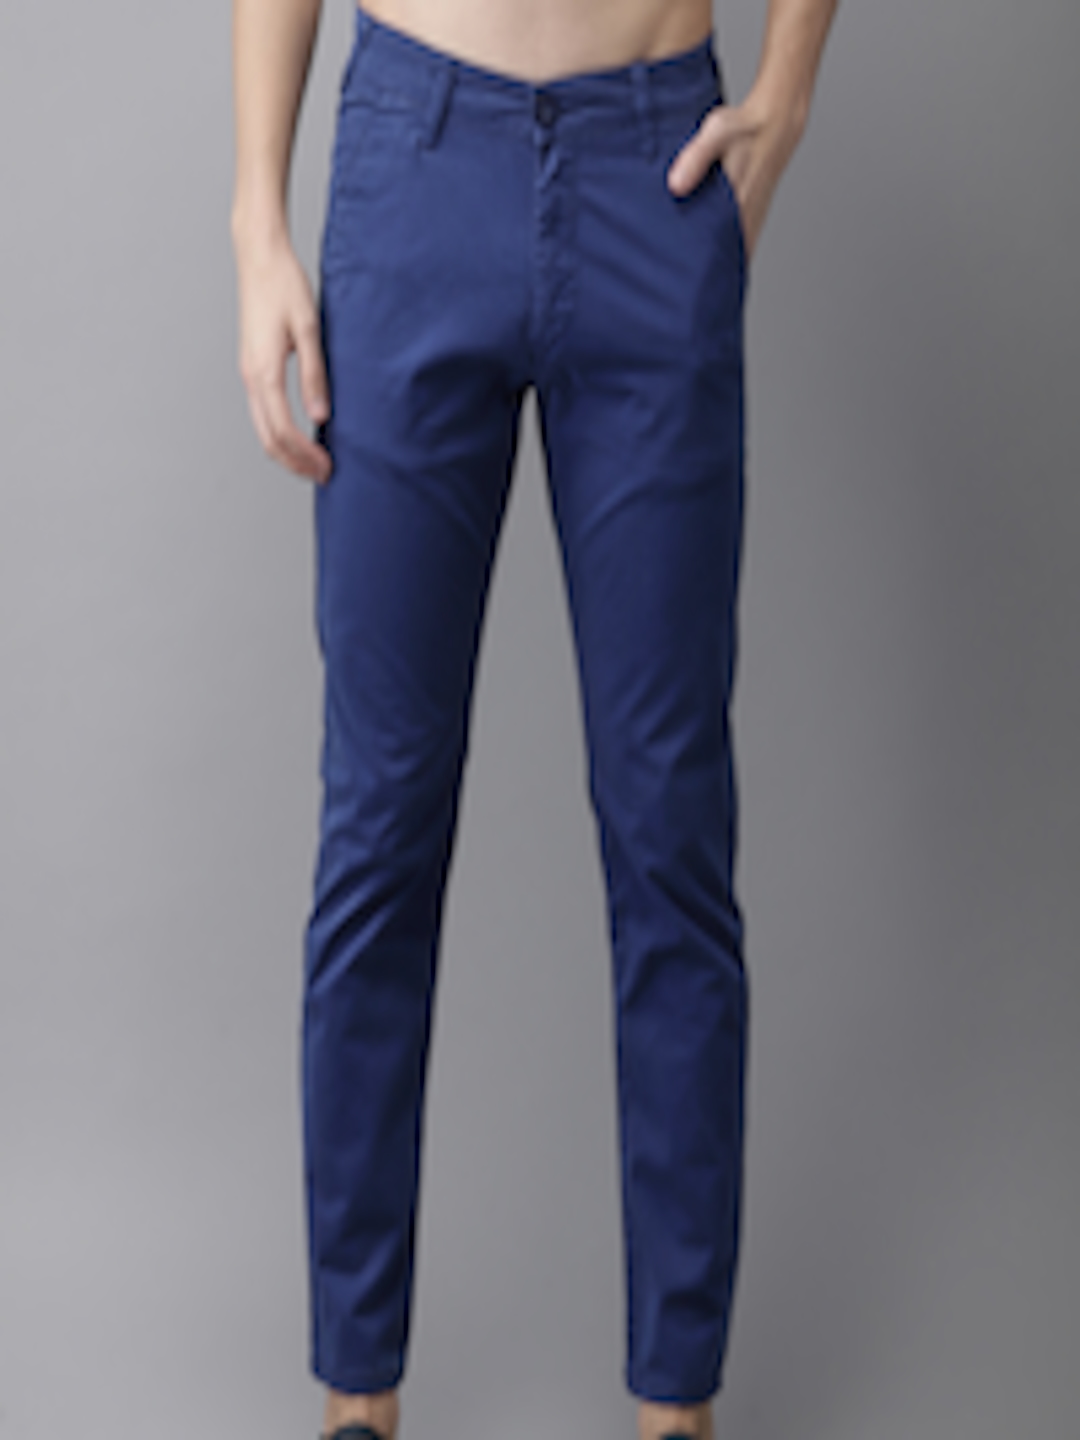 Buy HERE&NOW Men Blue Slim Fit Solid Chinos - Trousers for Men 9089105 ...